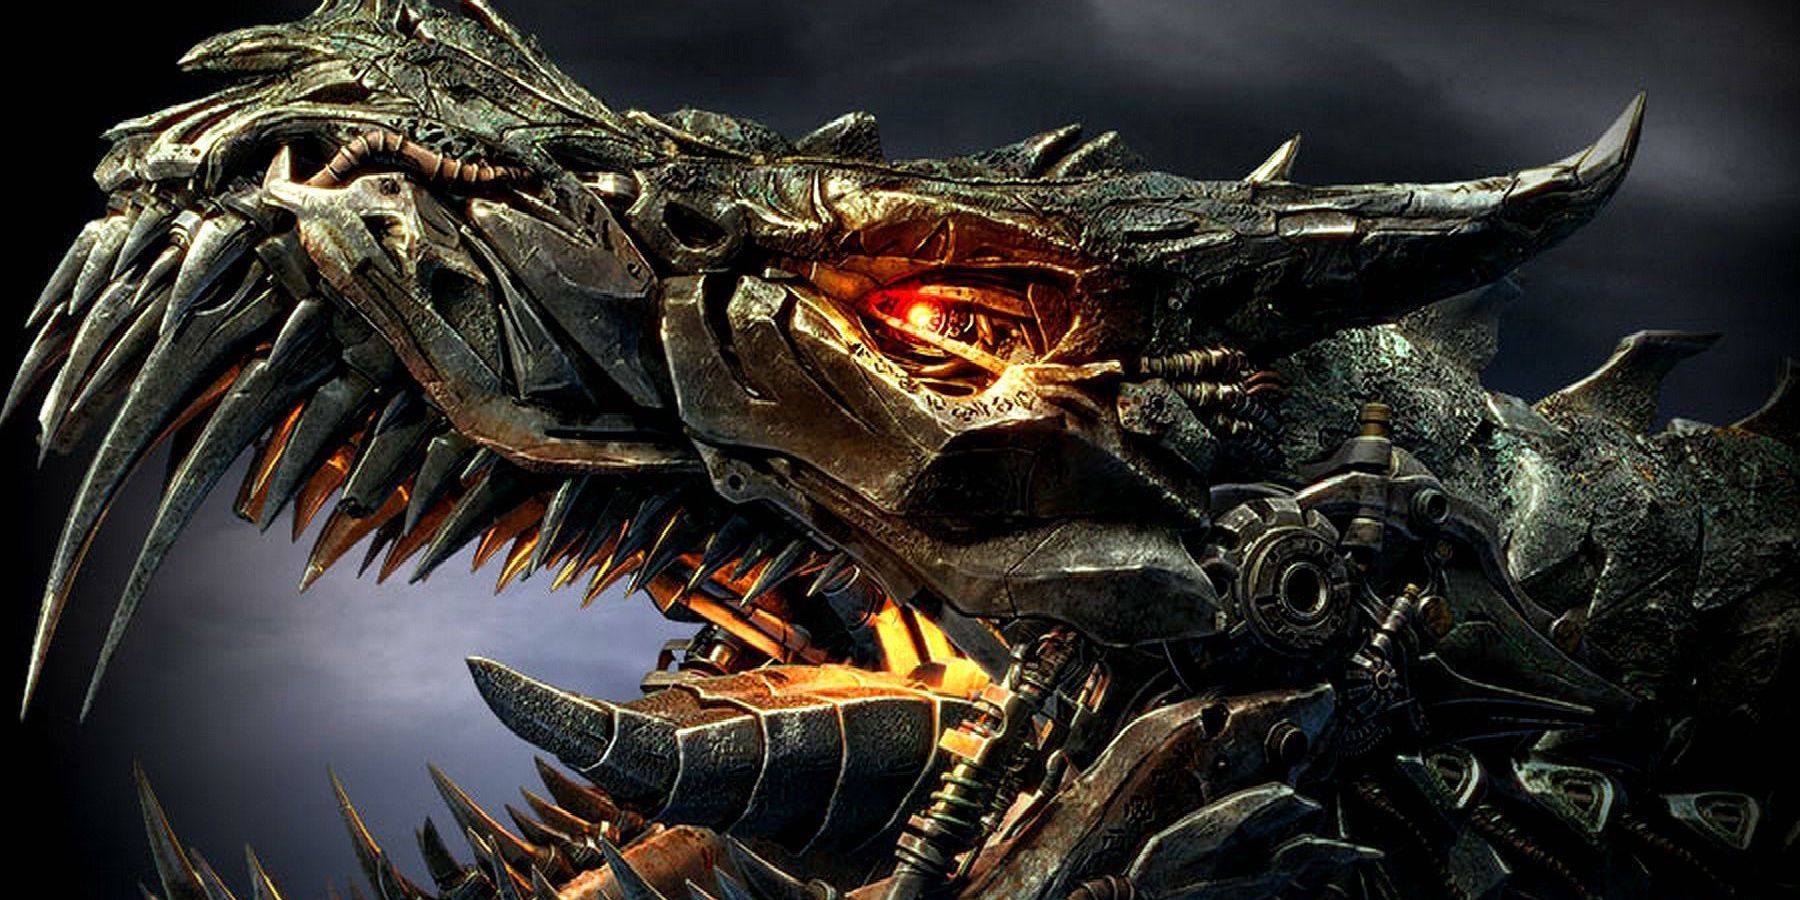 Transformers: The Last Knight features Baby Dinobots